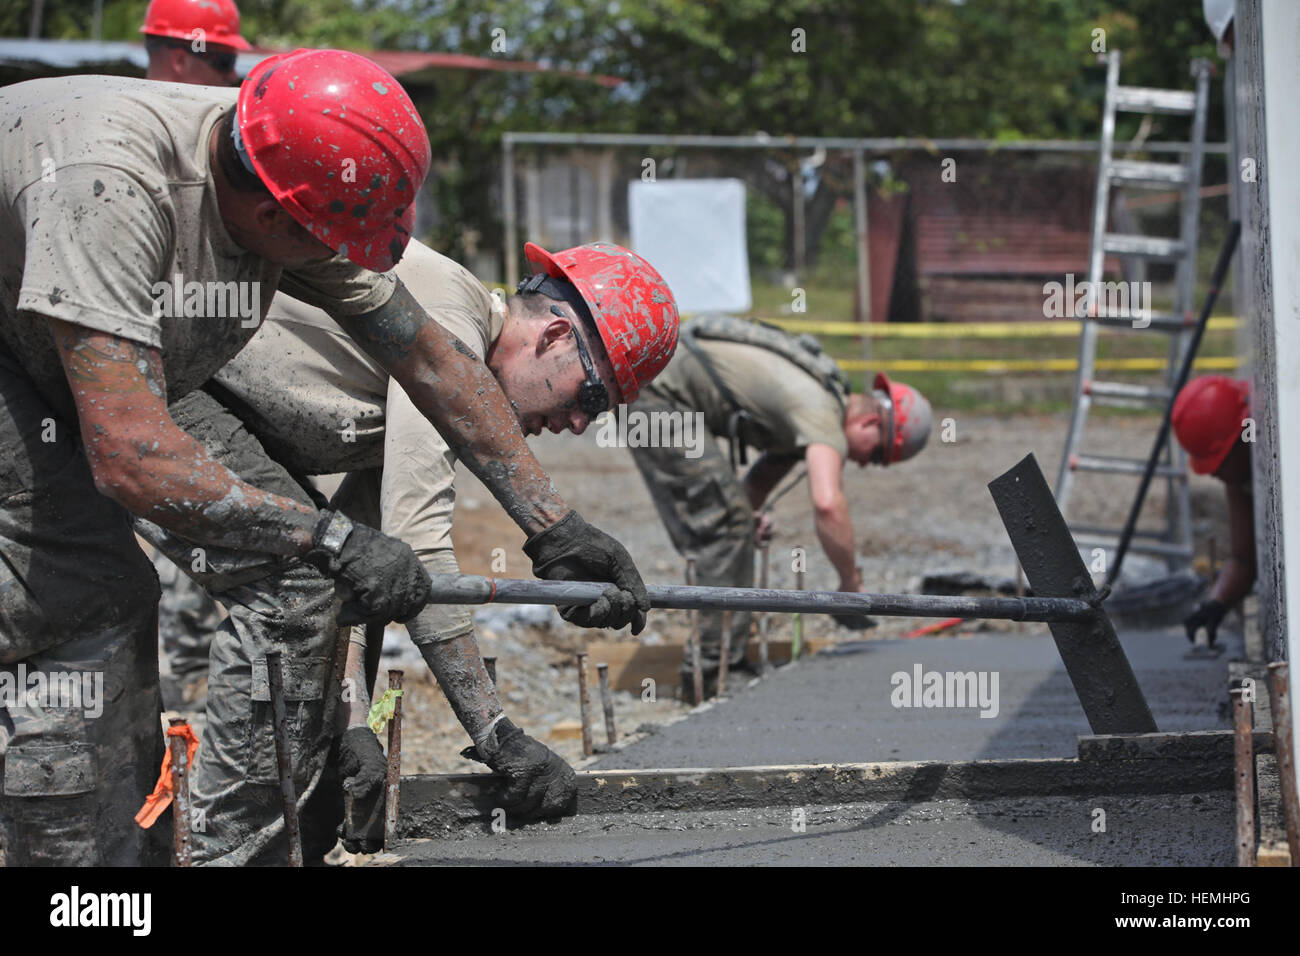 A group of Airmen assigned to the 200th Red Horse Squadron uses come-along to smooth out a new sidewalk in the town of Escobal, Colon, Panama, April 30, 2013. Beyond The Horizon 2013 – Panama is a U.S. Army South exercise providing engineering and medical support to rural communities in Panama. Conducted annually, these missions are part of U.S. Southern Command (SOUTHCOM) humanitarian and civic assistance program. (U.S. Army photo by Sgt. Austin Berner/ Released) Beyond the Horizon - Red Horse construction 030413-A-BZ540-124 Stock Photo